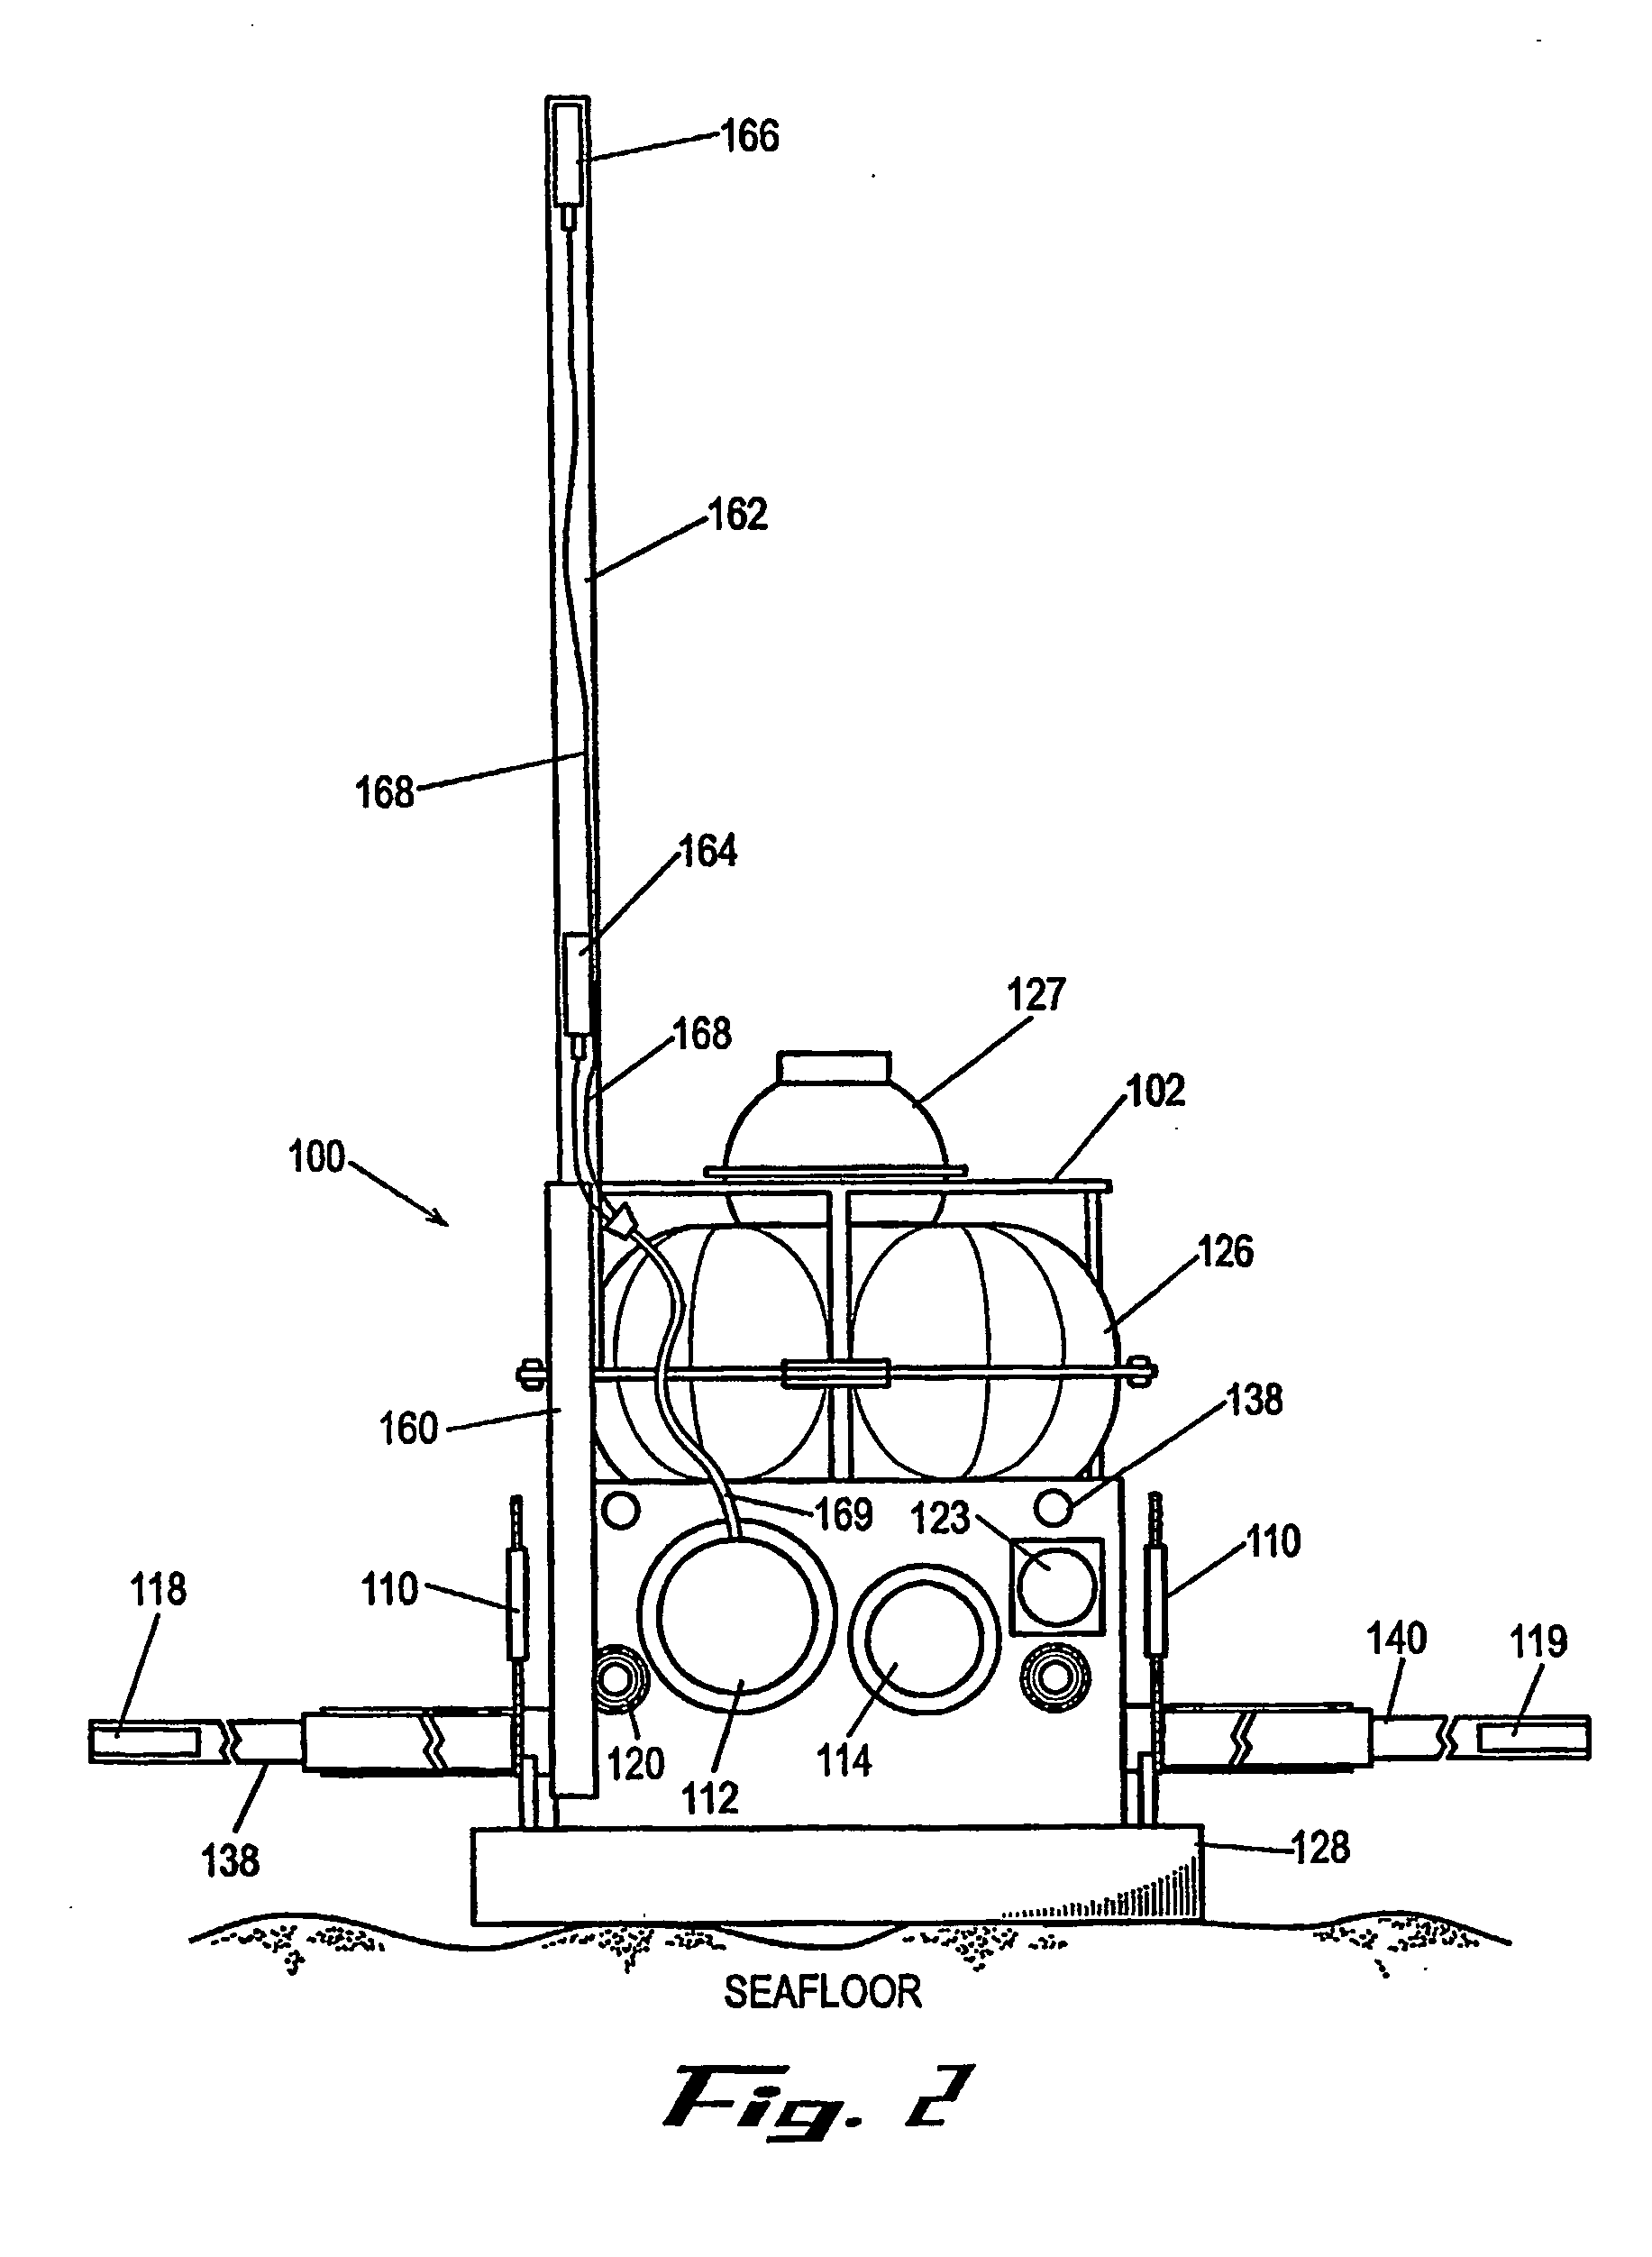 Method and system for seafloor geological survey using vertical electric field measurement